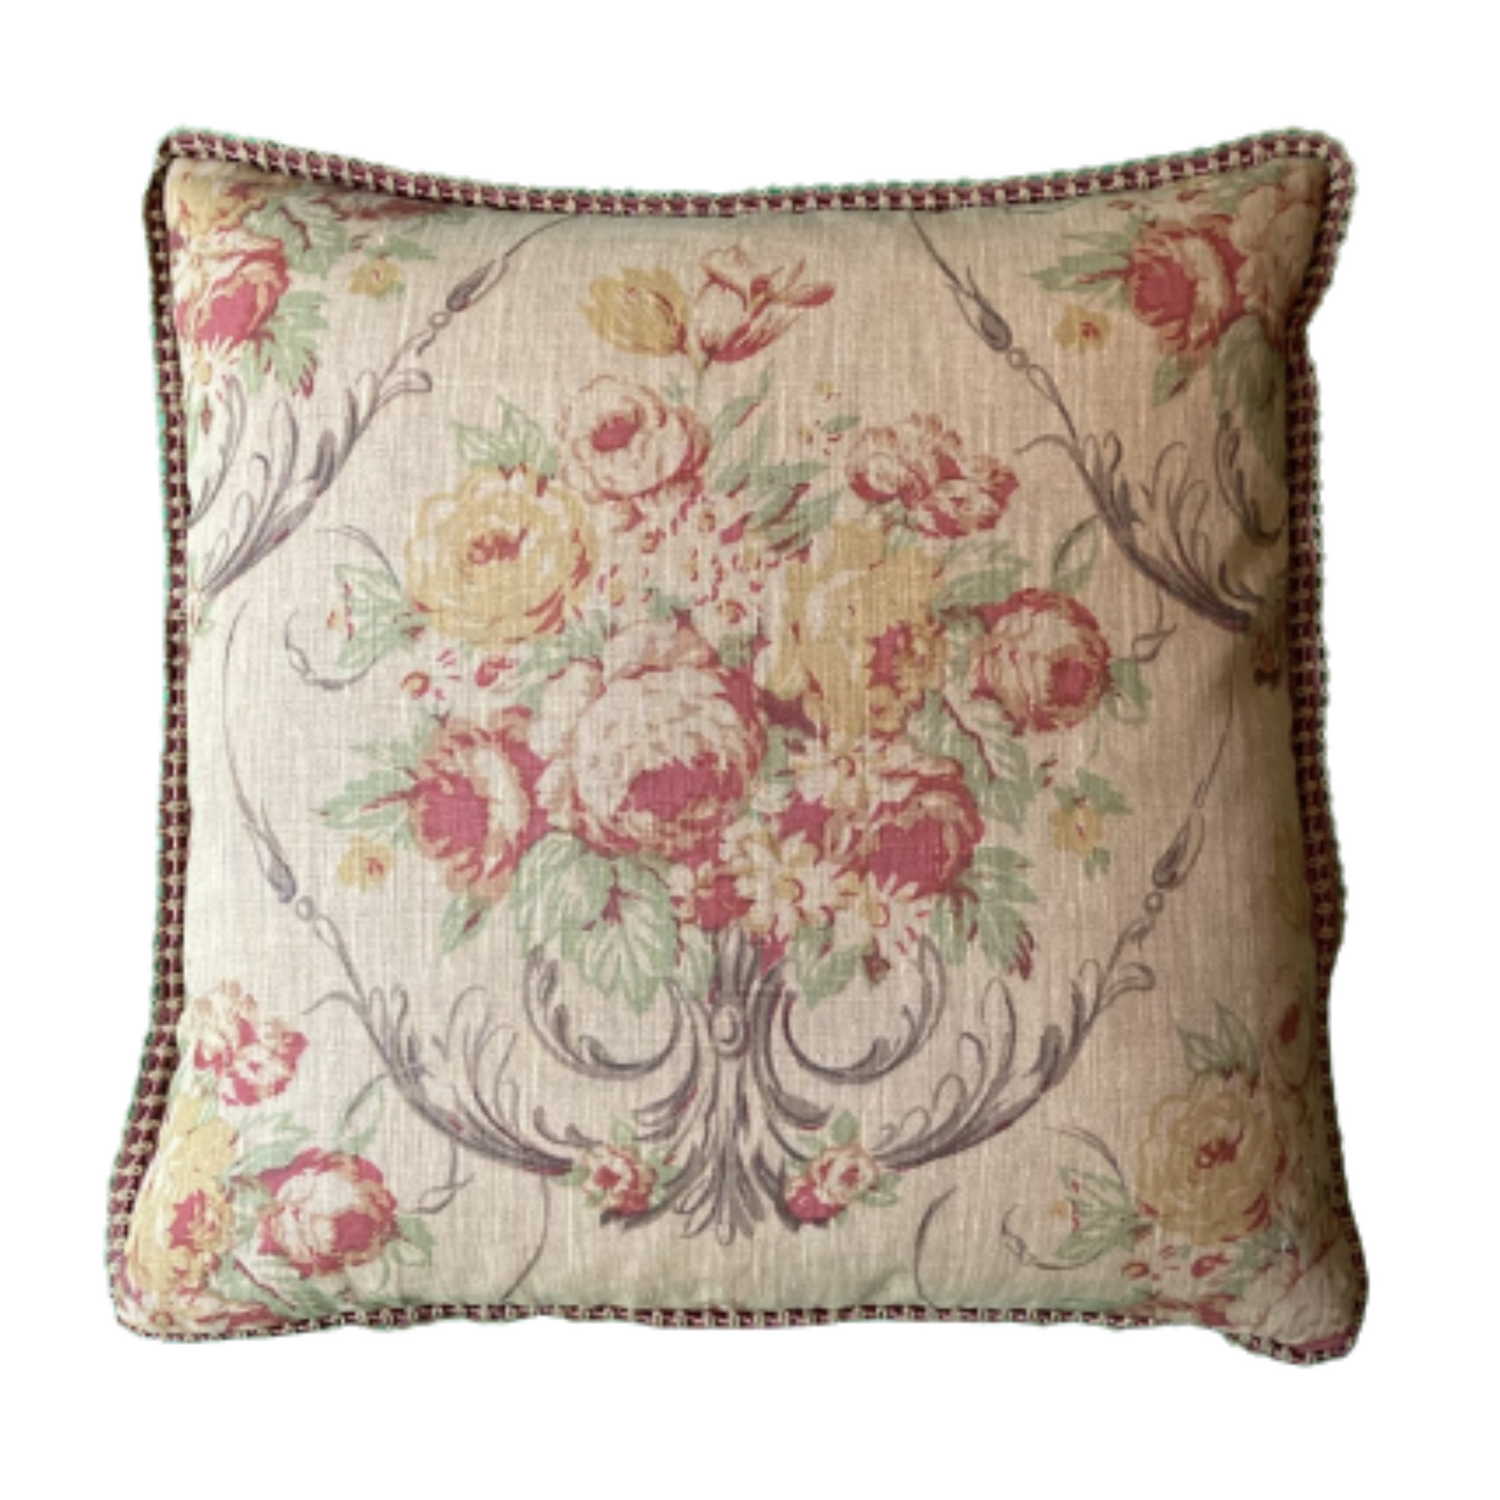 Vintage Classic Roses and Tulips 20 x 20 Square Linen Designer Throw Pillow with Down Feather Insert